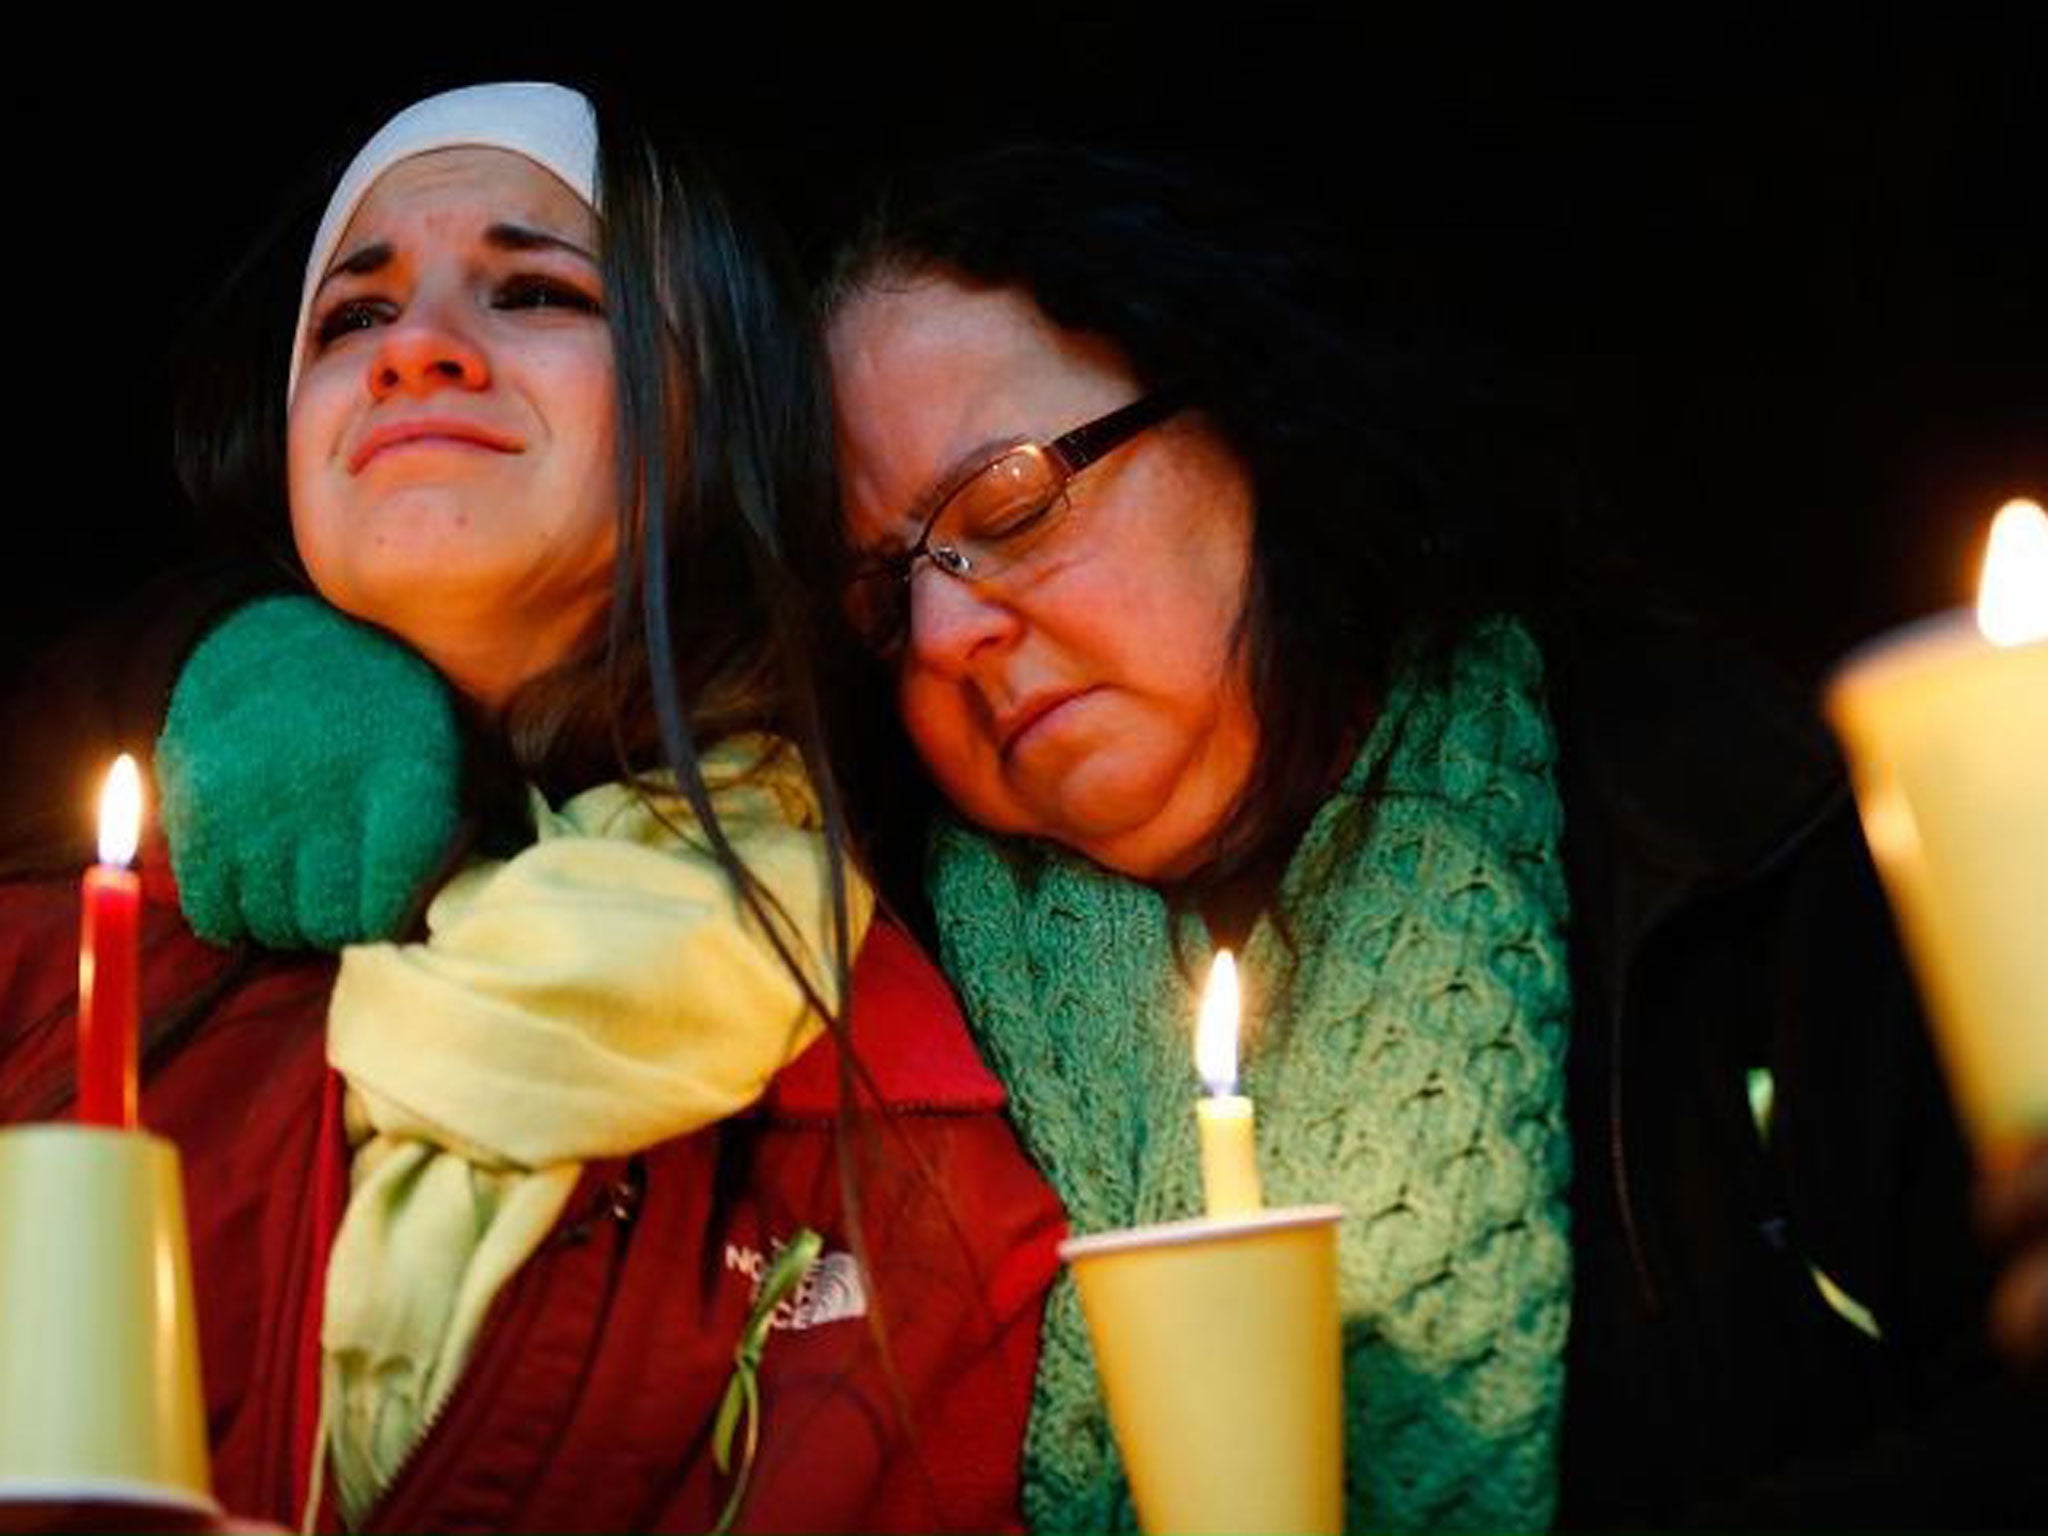 Donna Soto (R), mother of Victoria Soto, the first-grade teacher at Sandy Hook Elementary School who was shot and killed while protecting her students, hugs her daughter Karly